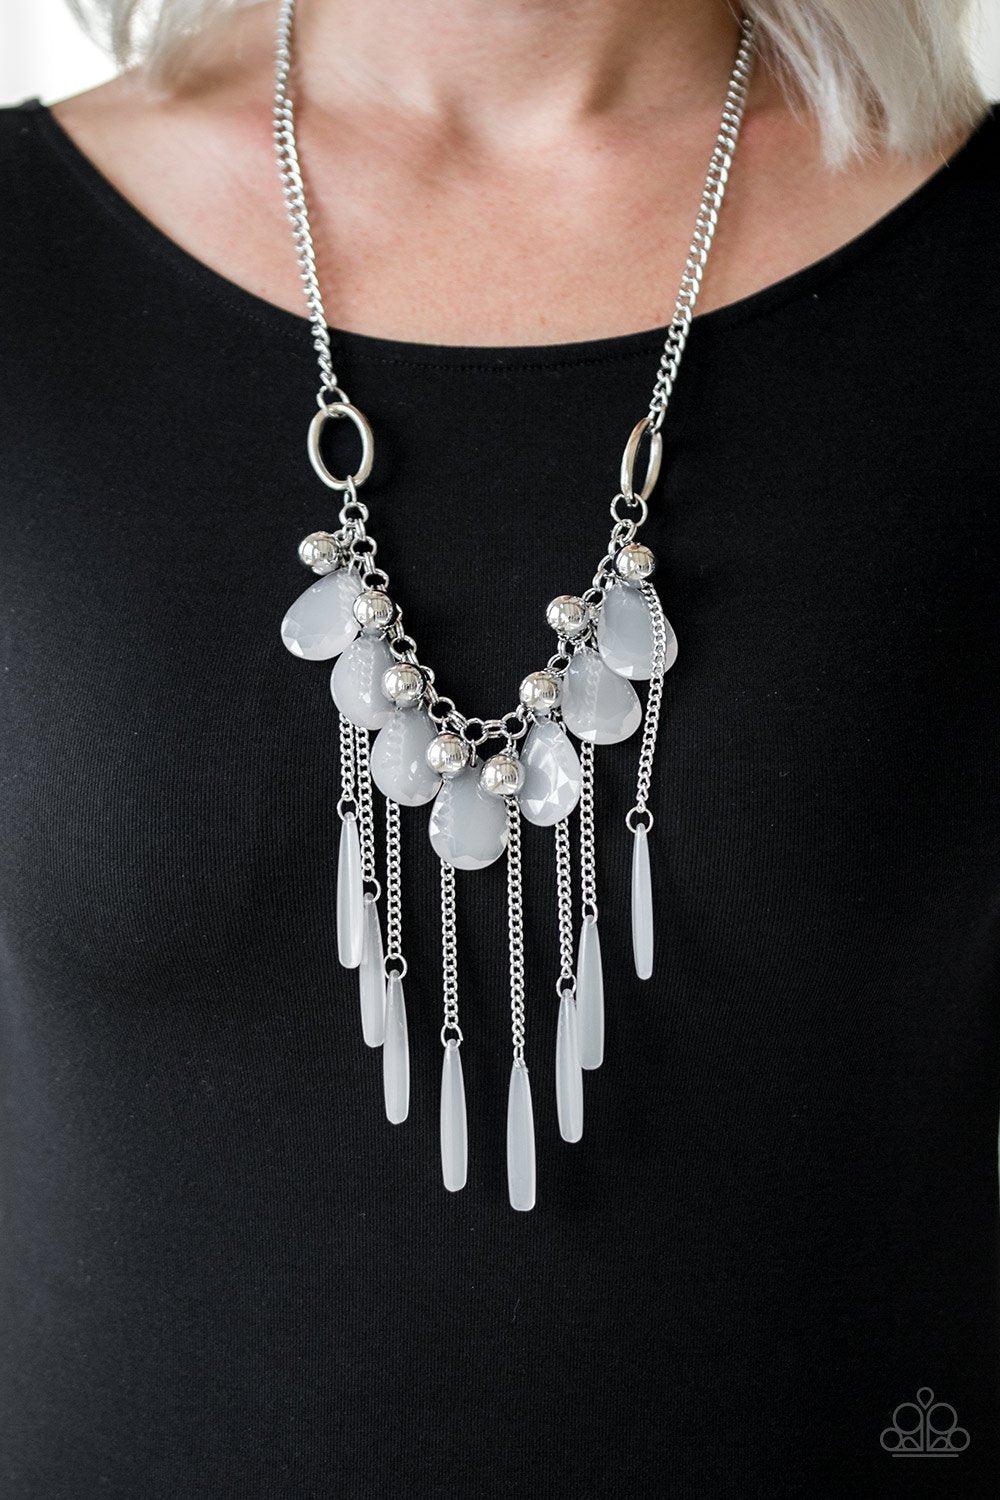 Roaring Riviera Silver Necklace - Paparazzi Accessories - lightbox -CarasShop.com - $5 Jewelry by Cara Jewels